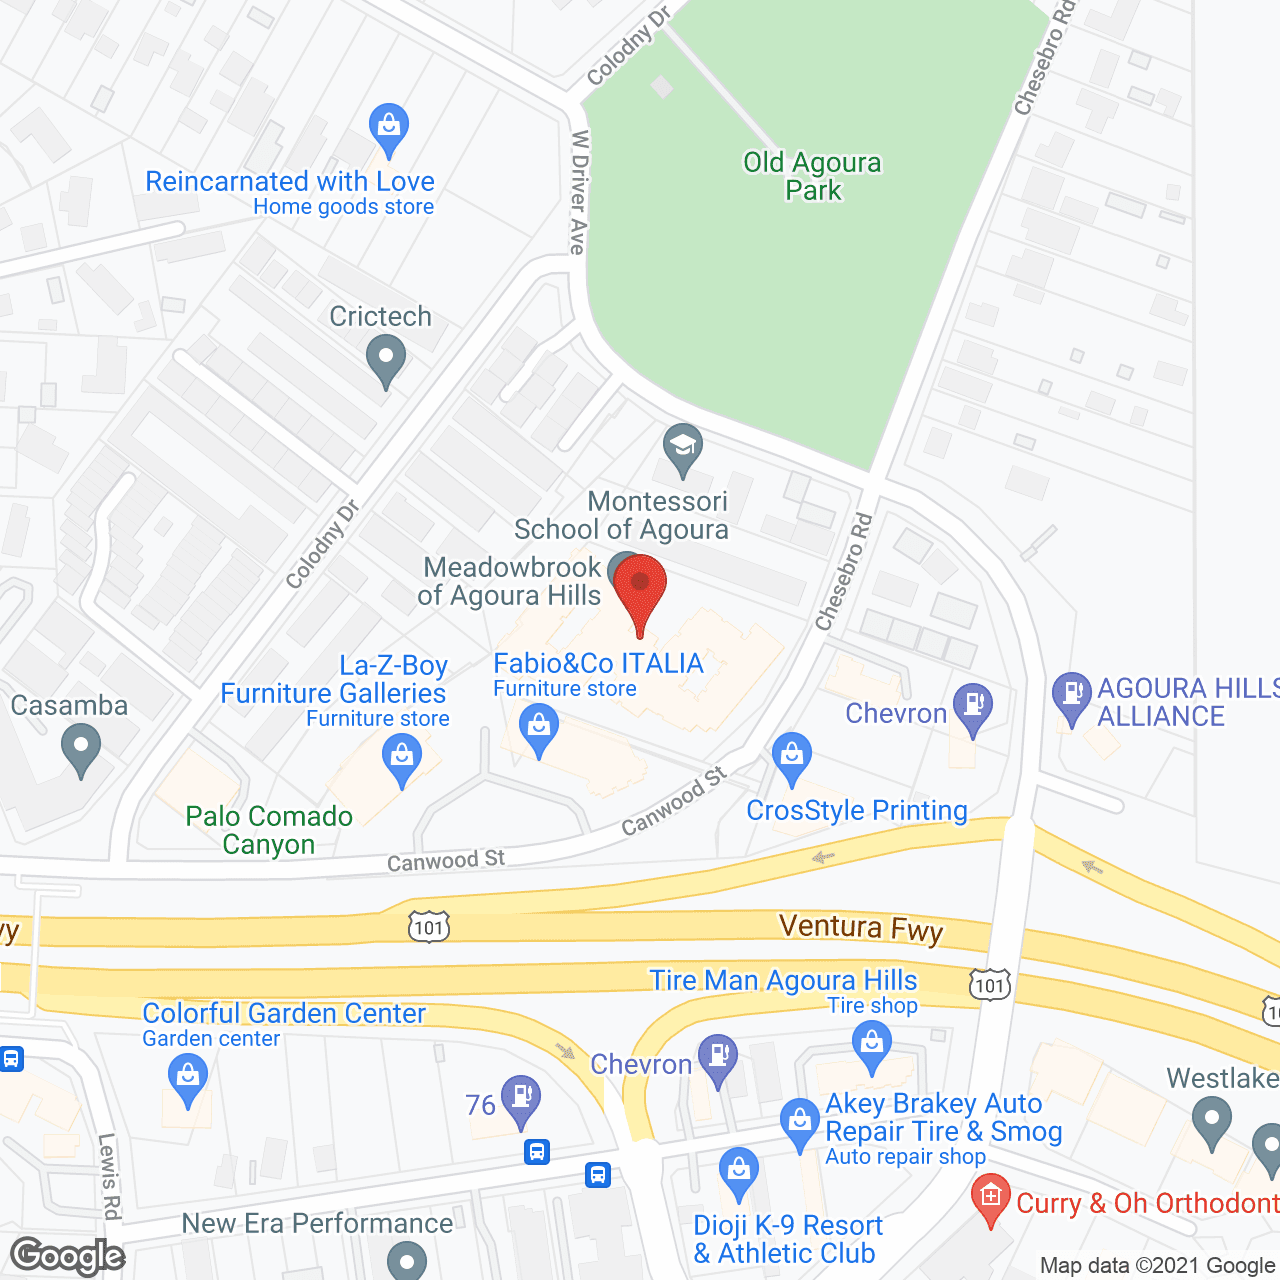 Meadowbrook of Agoura Hills in google map